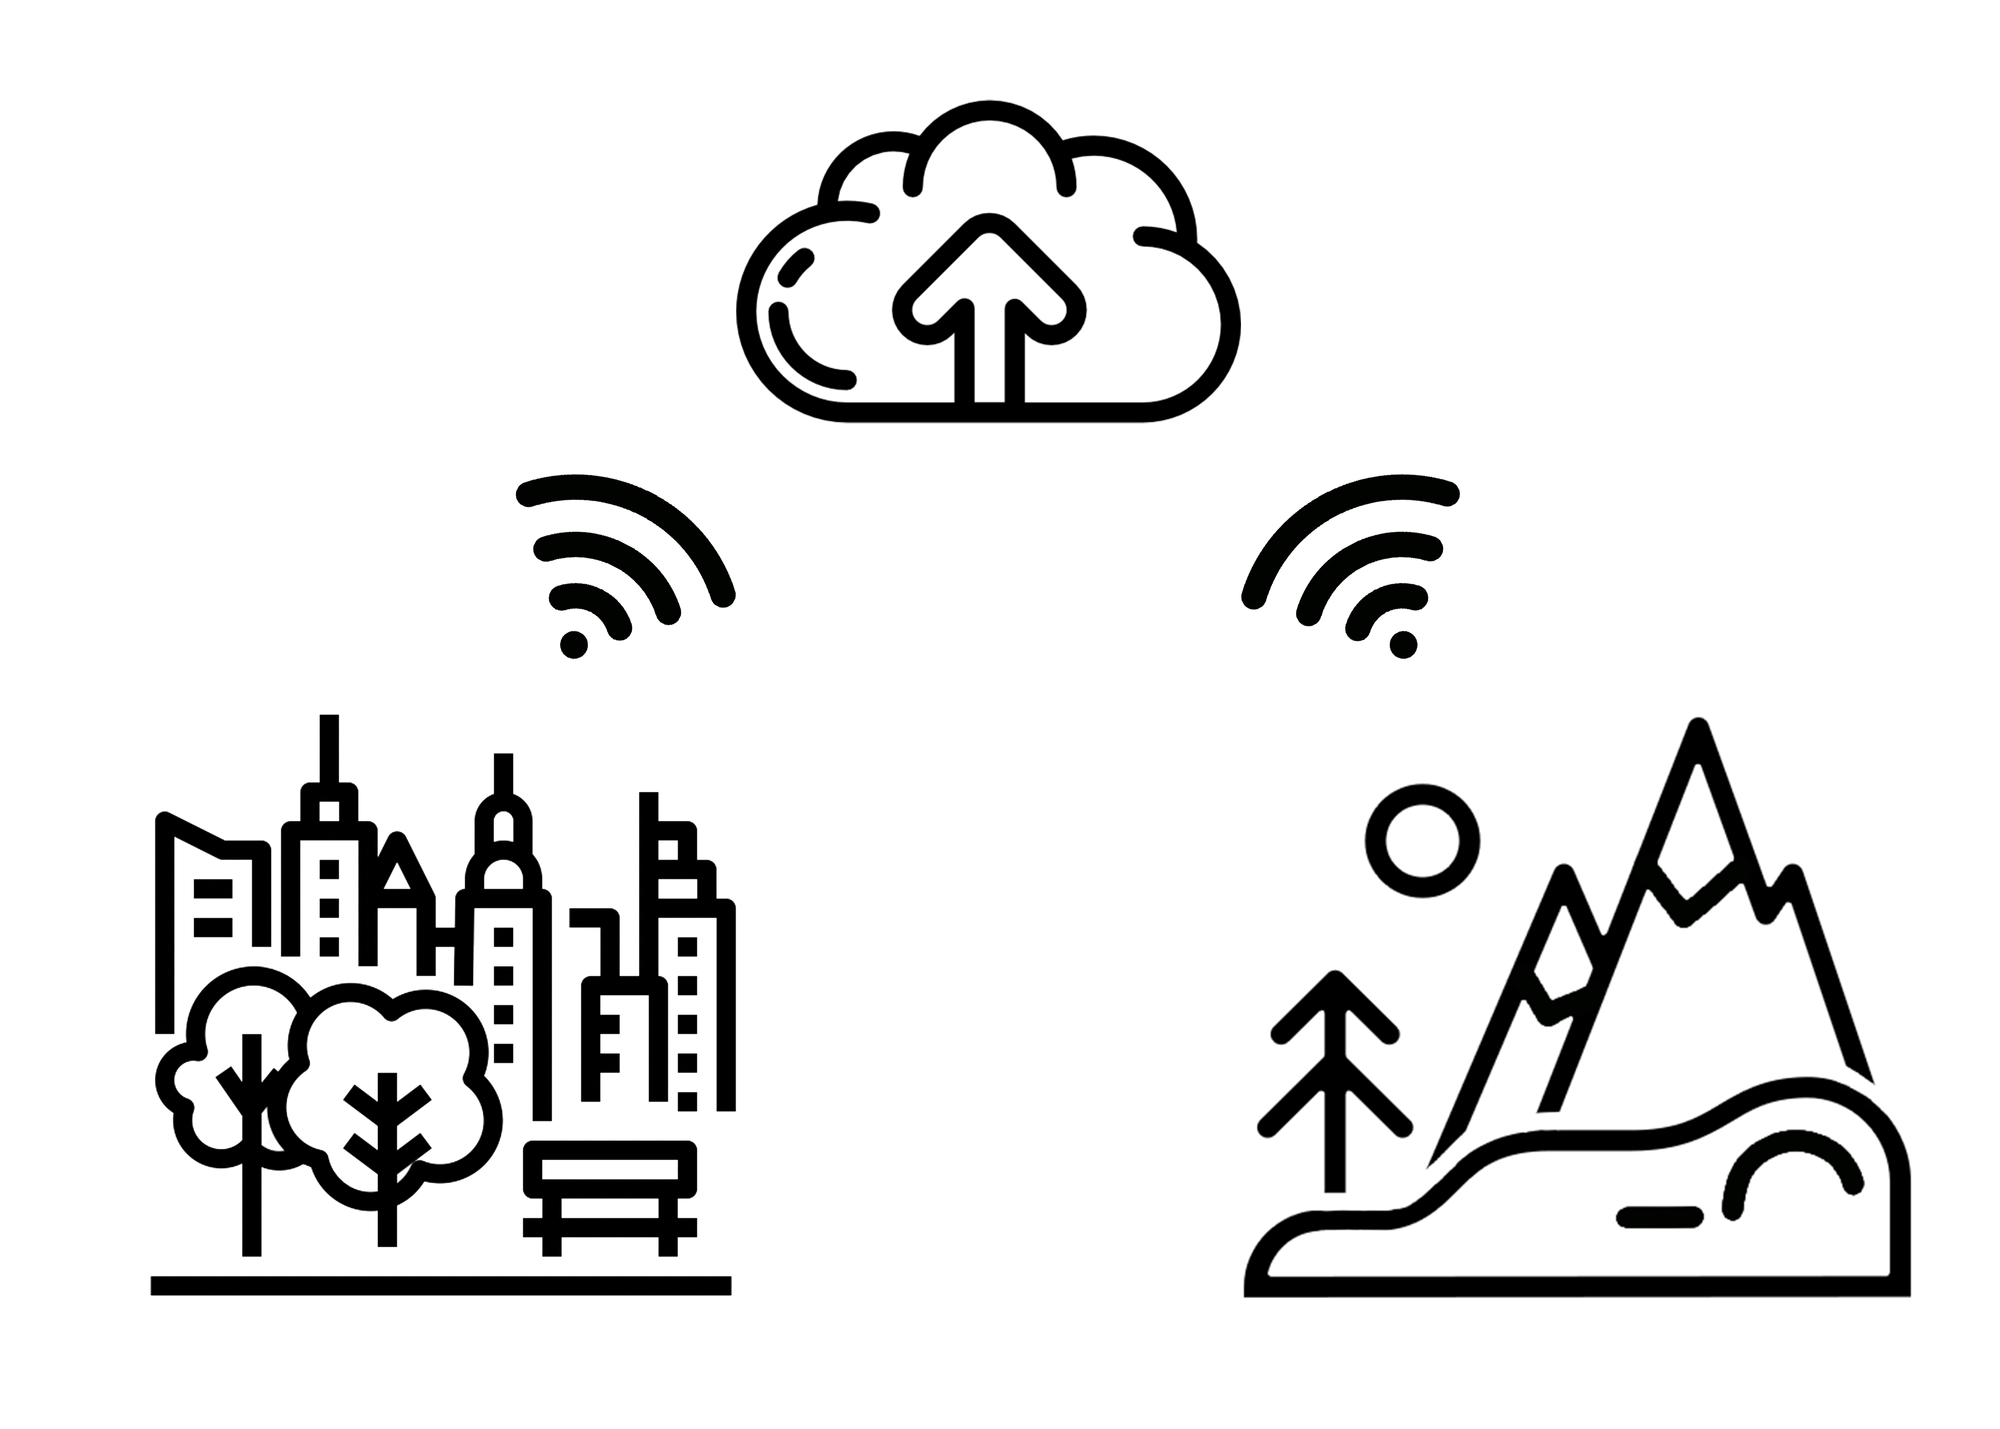 How IoT and LoRaWAN Tracker Helps You Stay Prepared Whether in Town or Hiking